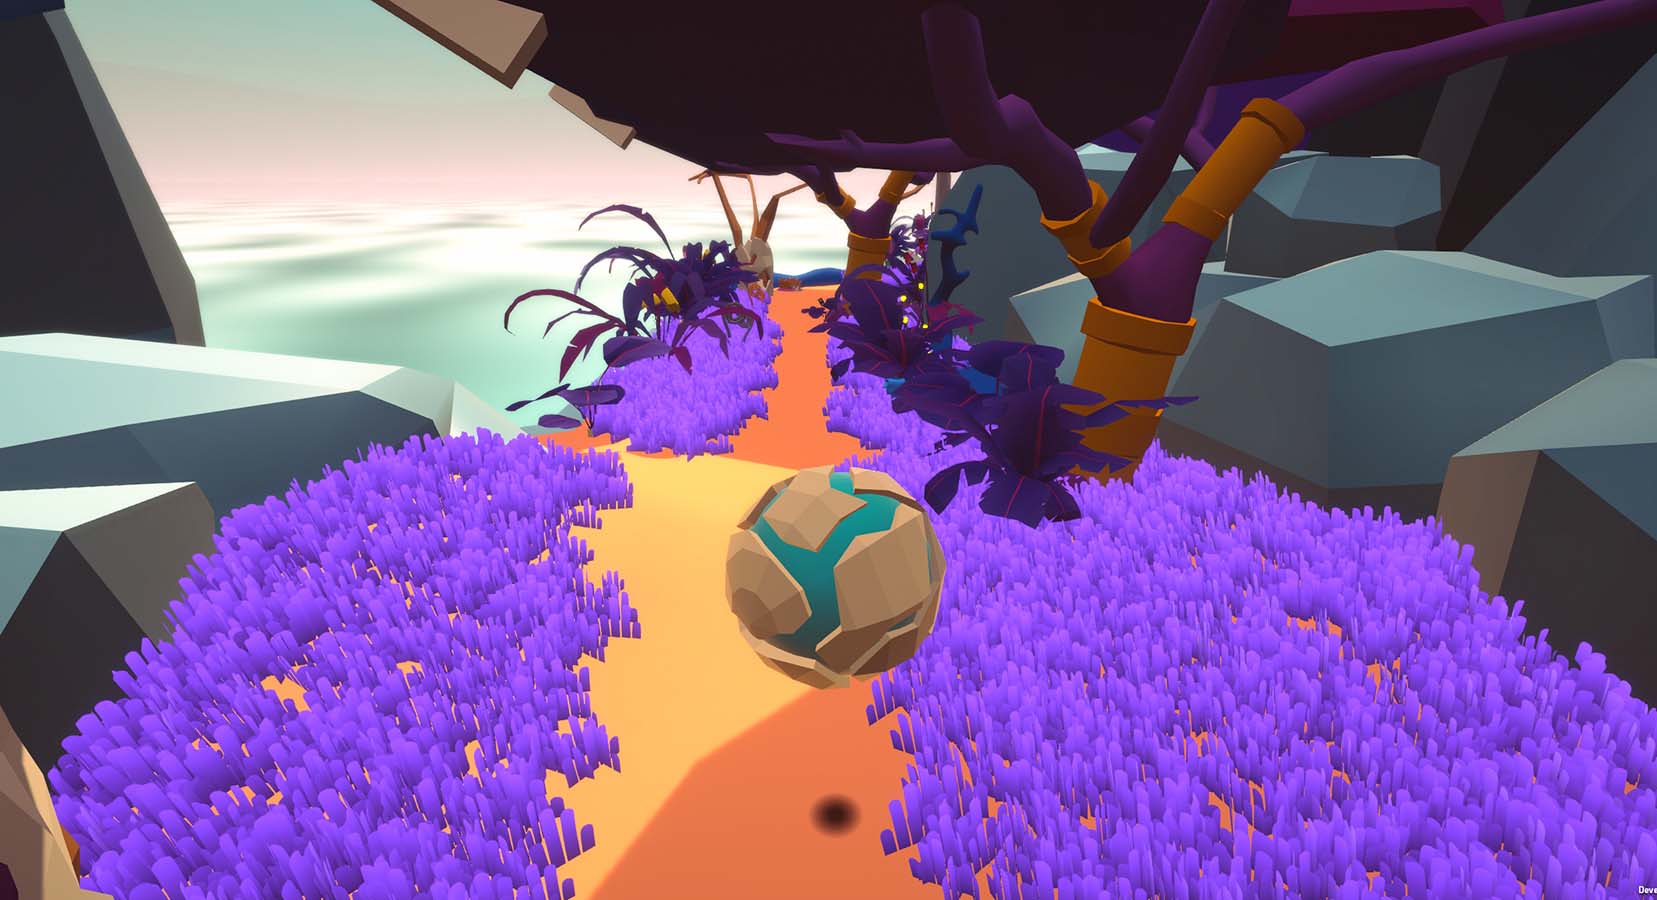 In-Game sceenshot of the player character in their ball form travelling through a grassy field